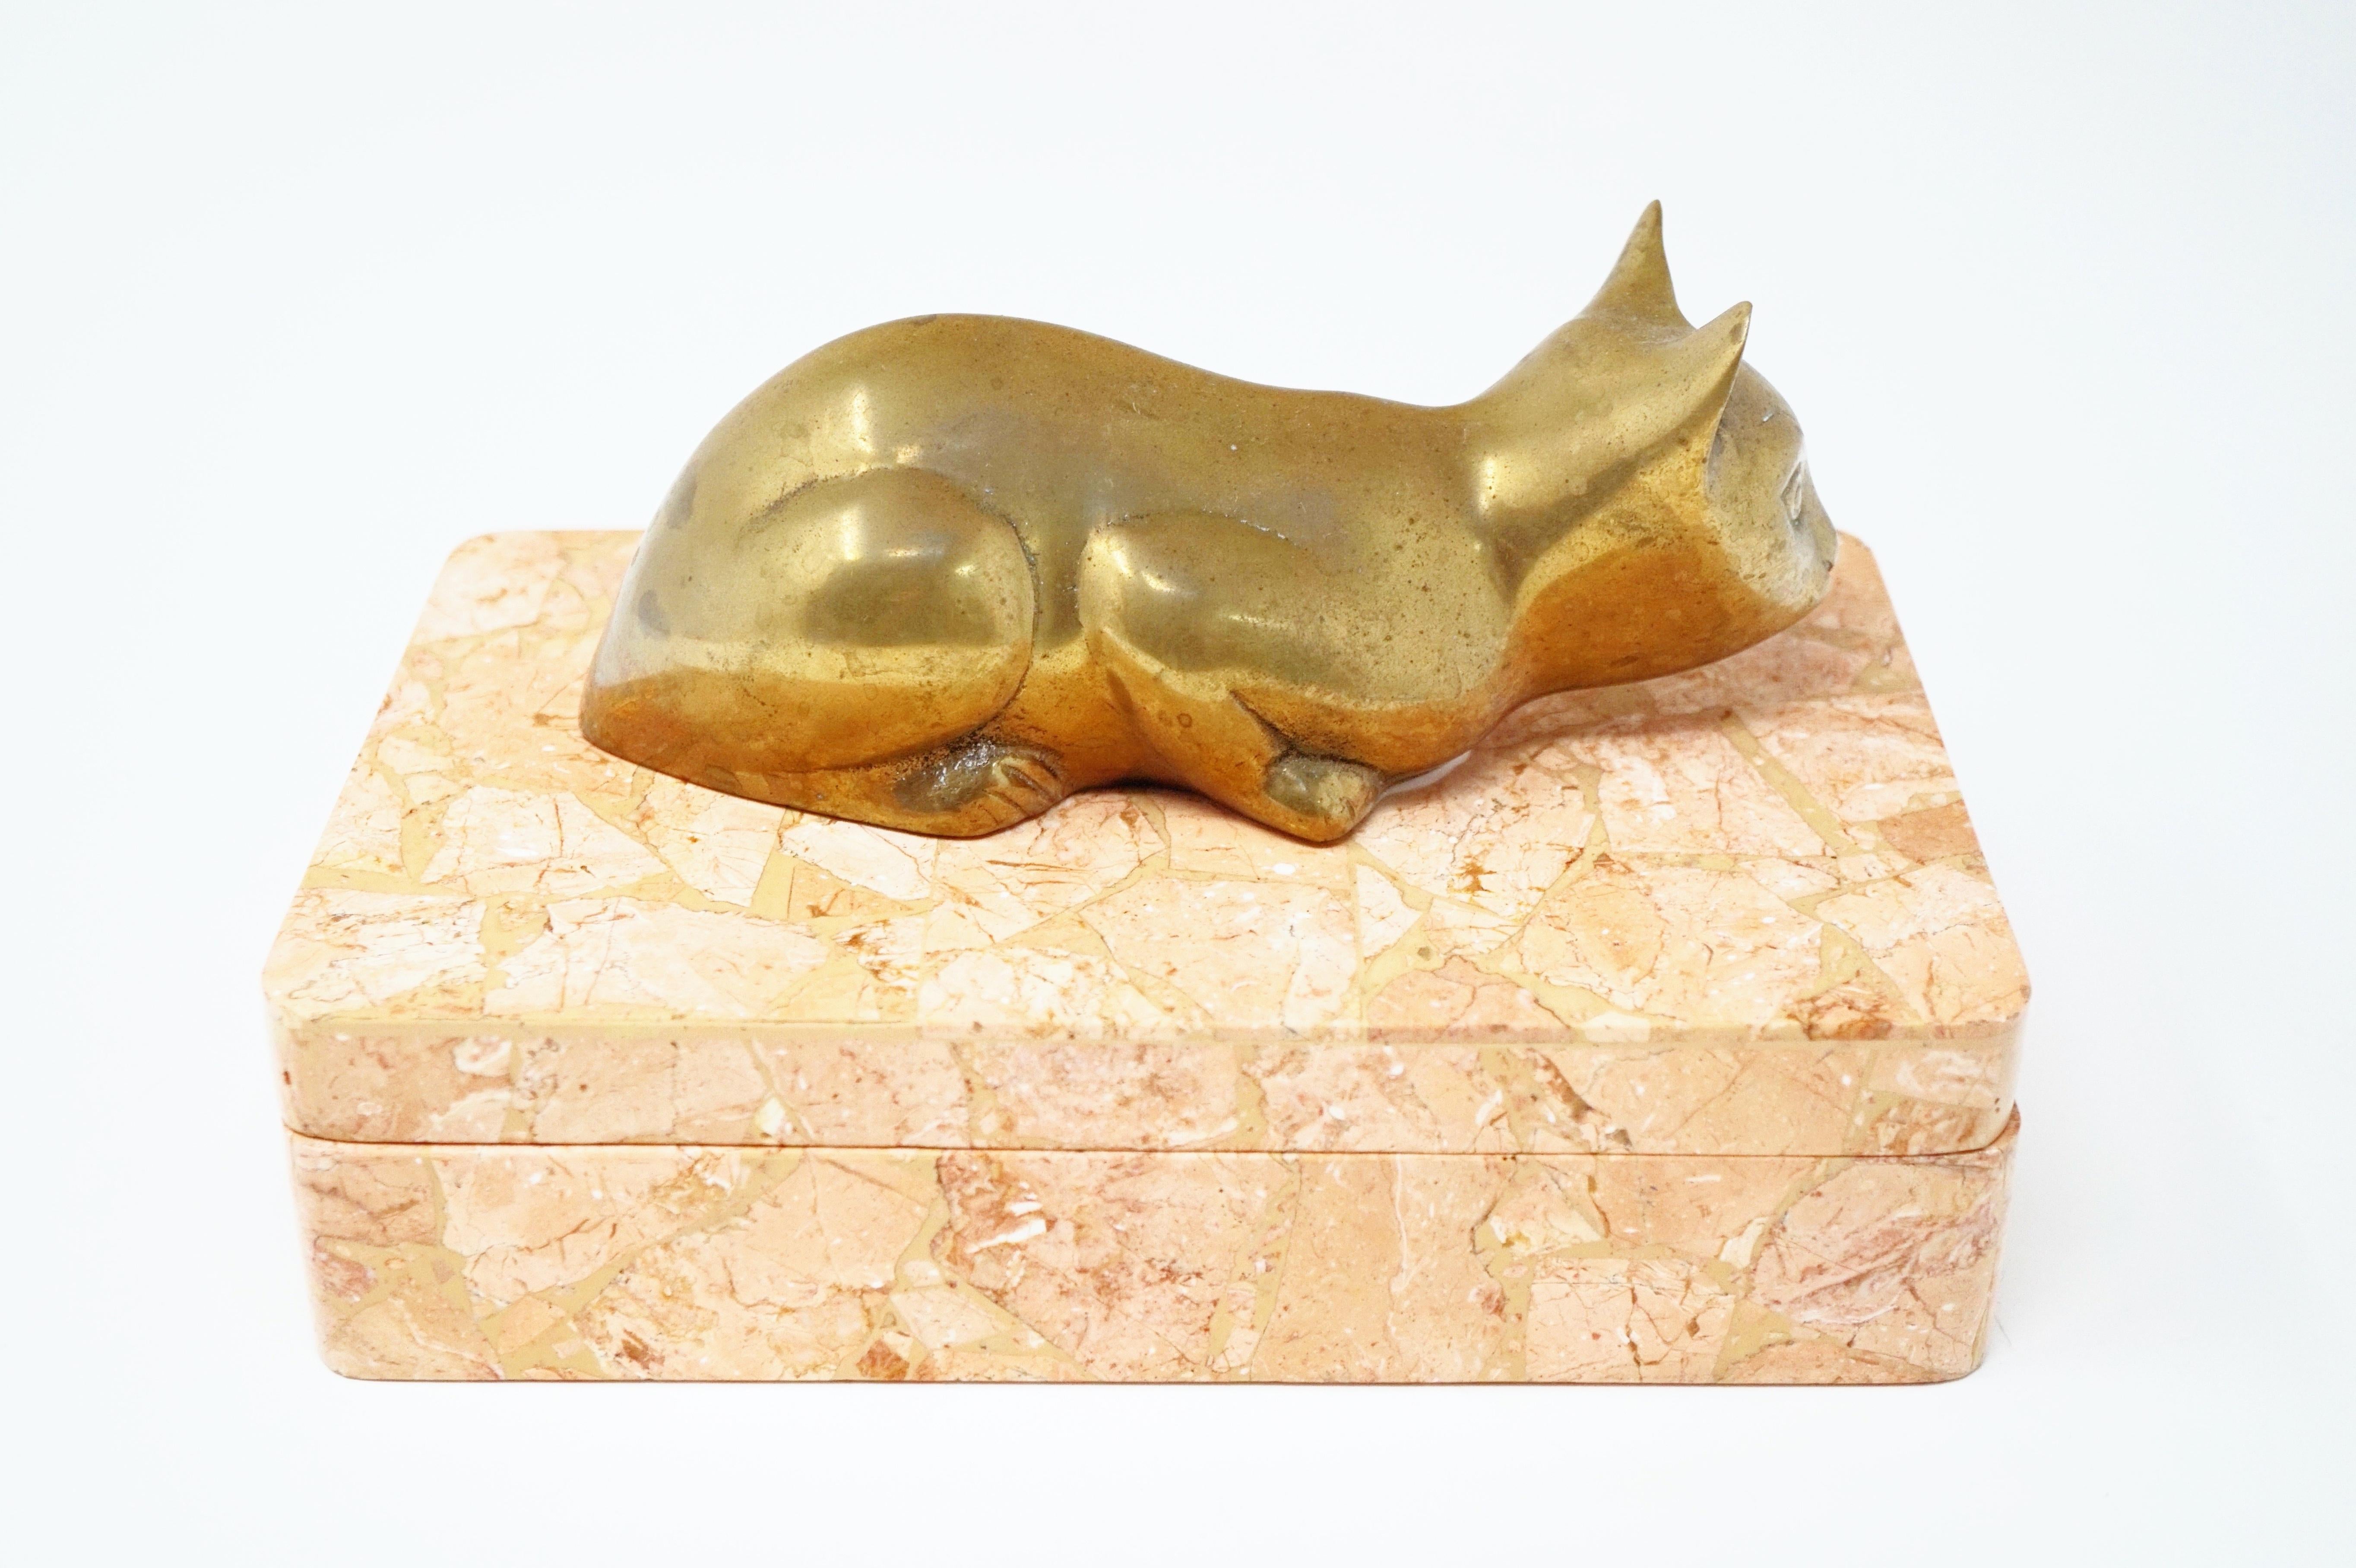 - Velvet lined
- Tessellated pink stone
- Brass cat handle
- This item was used as a TV prop and has a small 